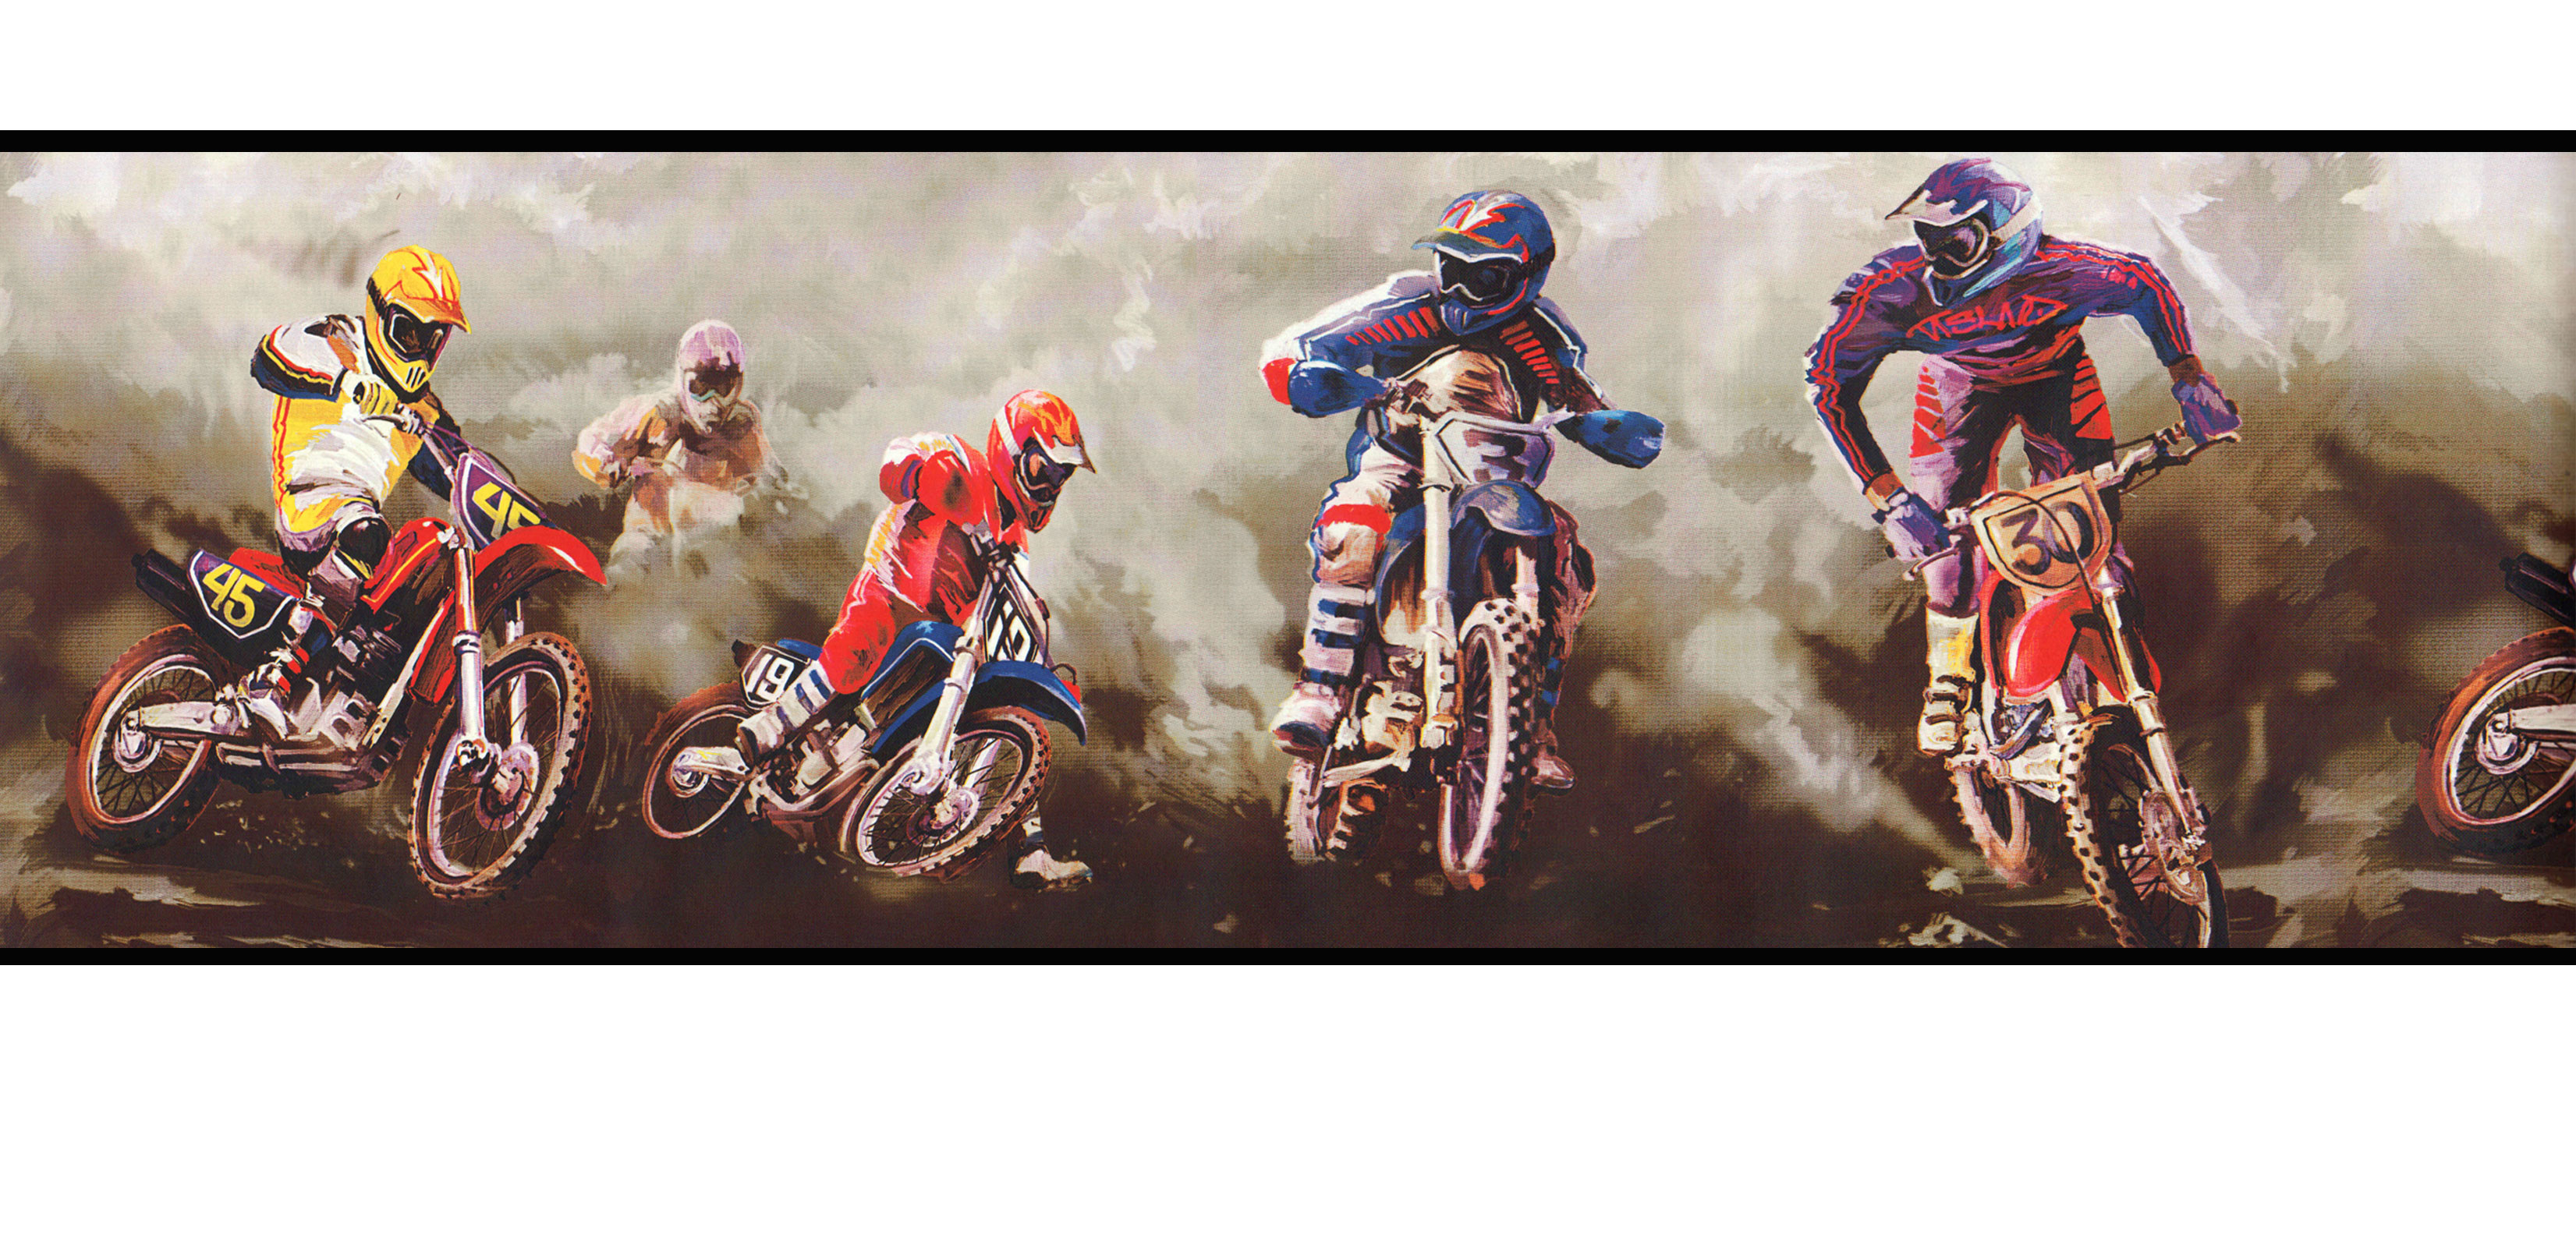 Lampshades Ideal To Match Motocross Decals & Motocross FMX Wallpaper Borders.